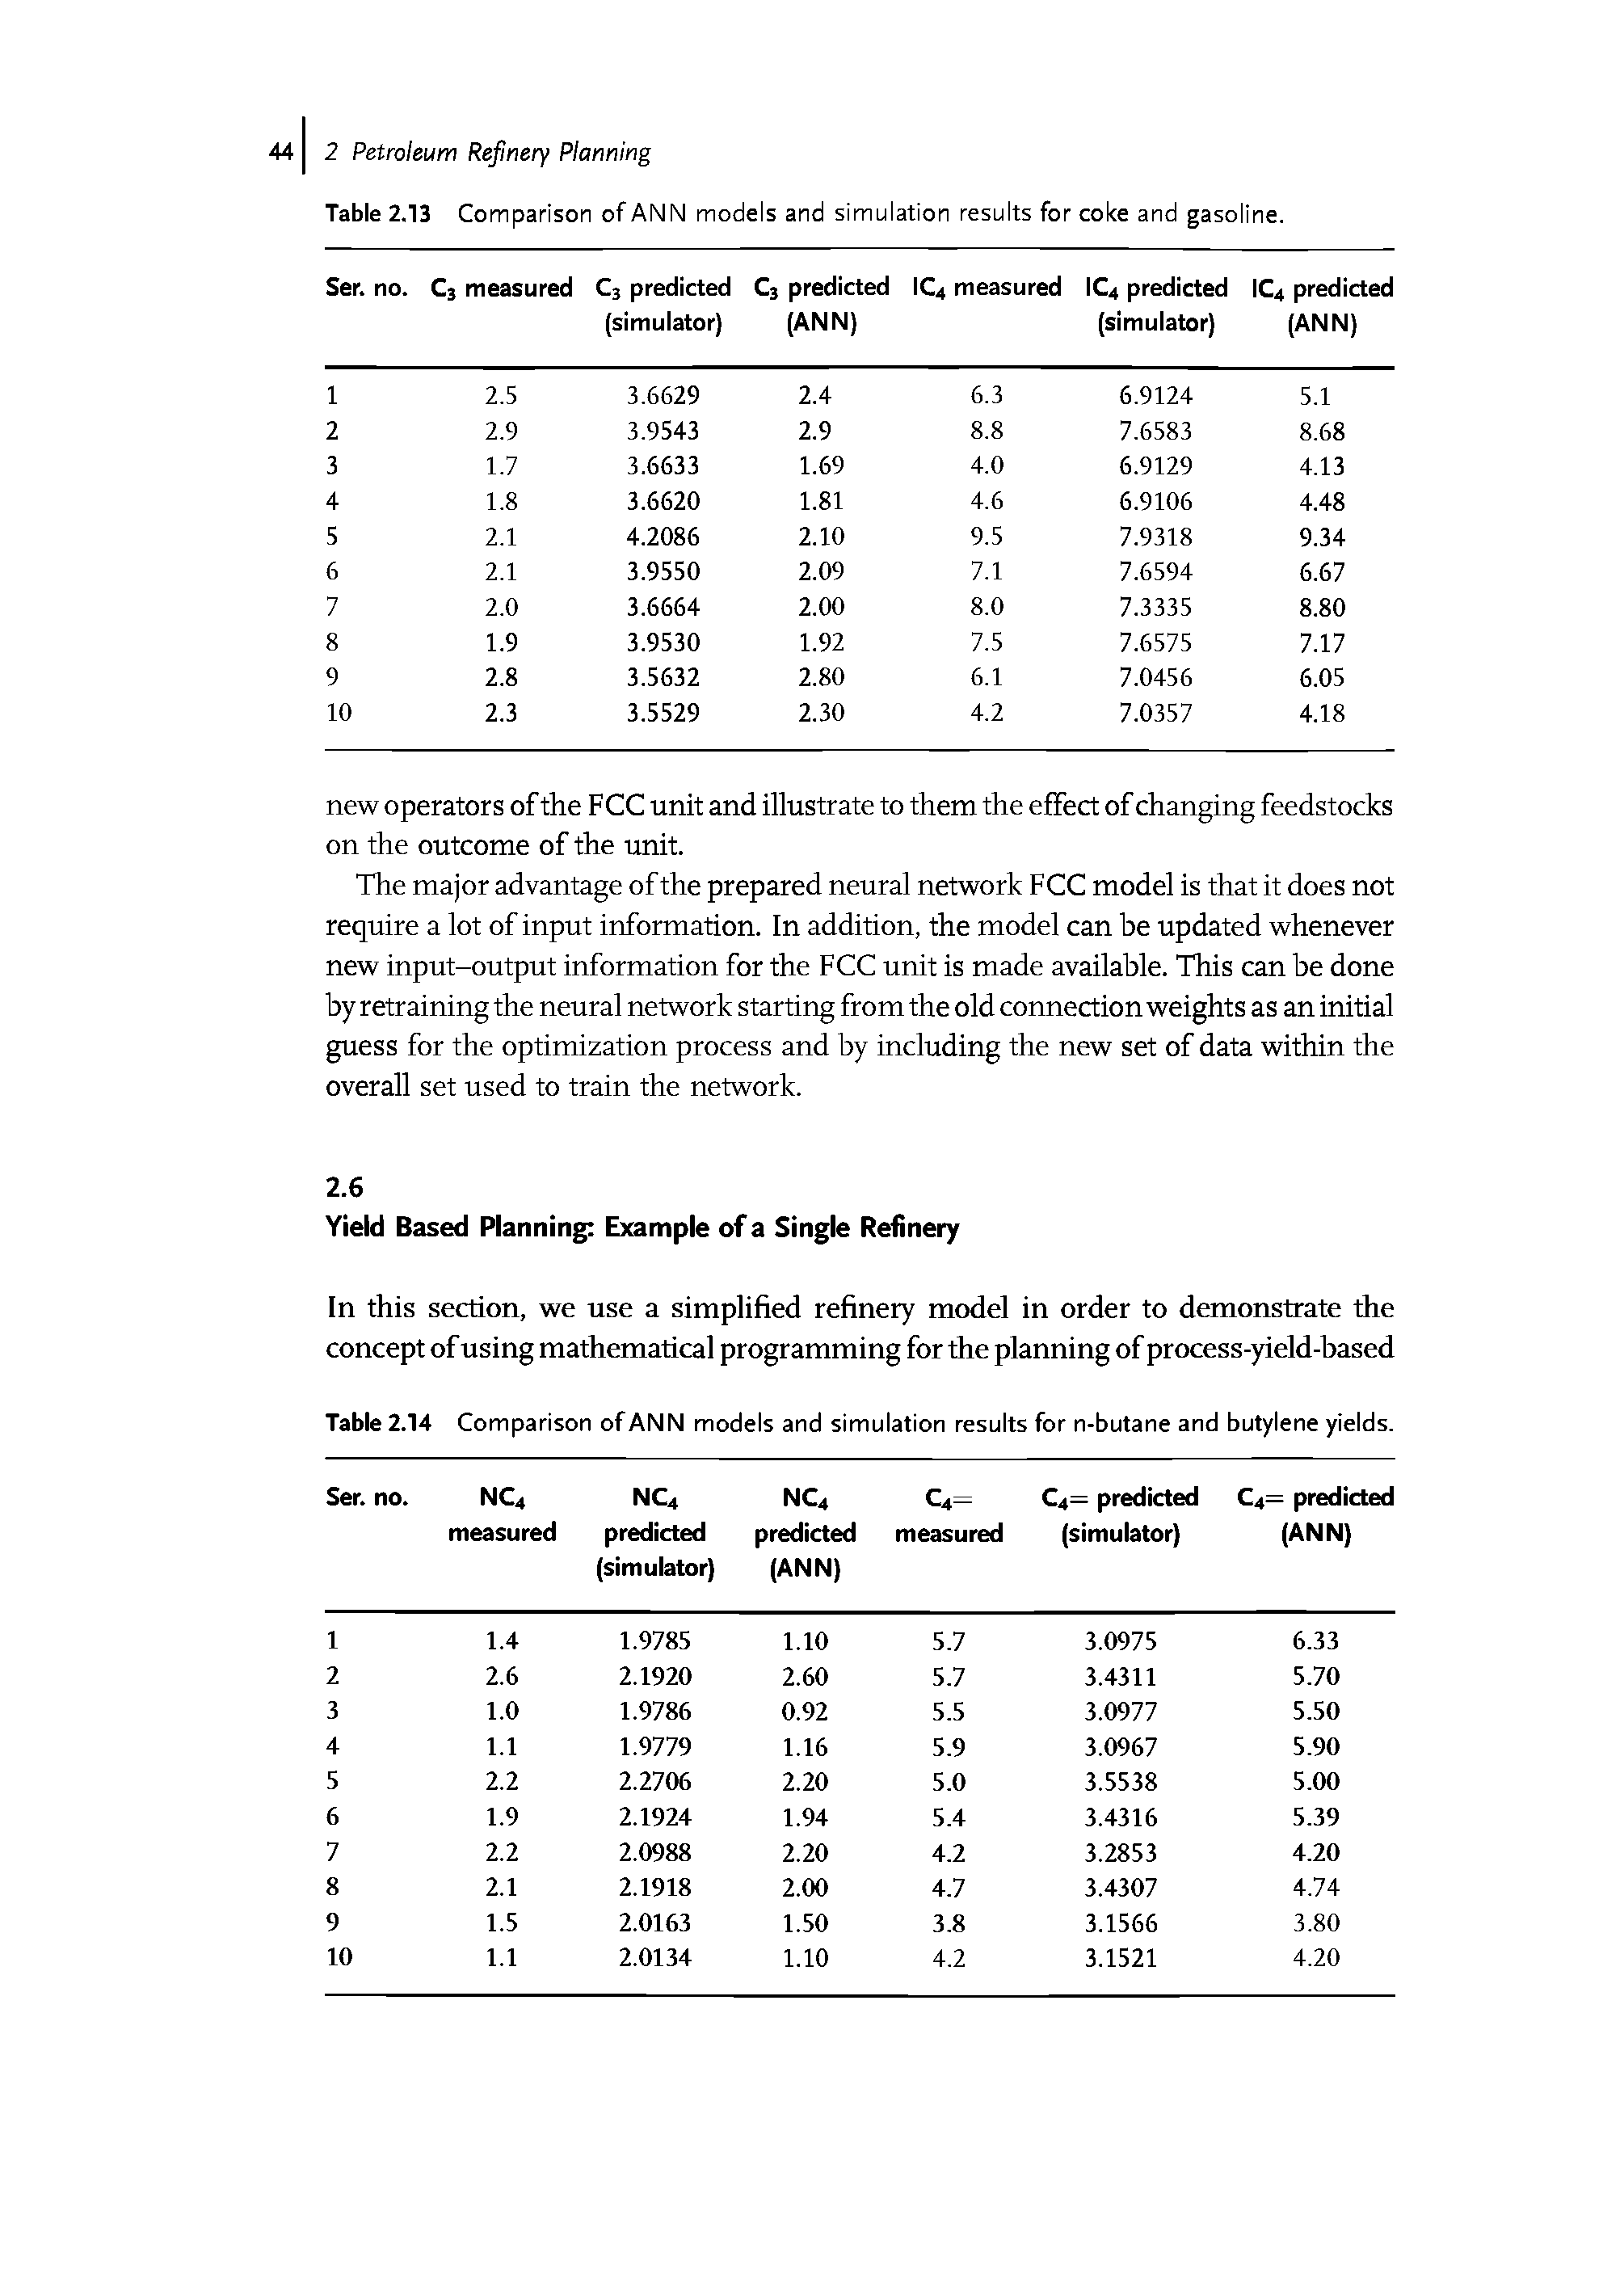 Table 2.14 Comparison of ANN models and simulation results for n-butane and butylene yields.